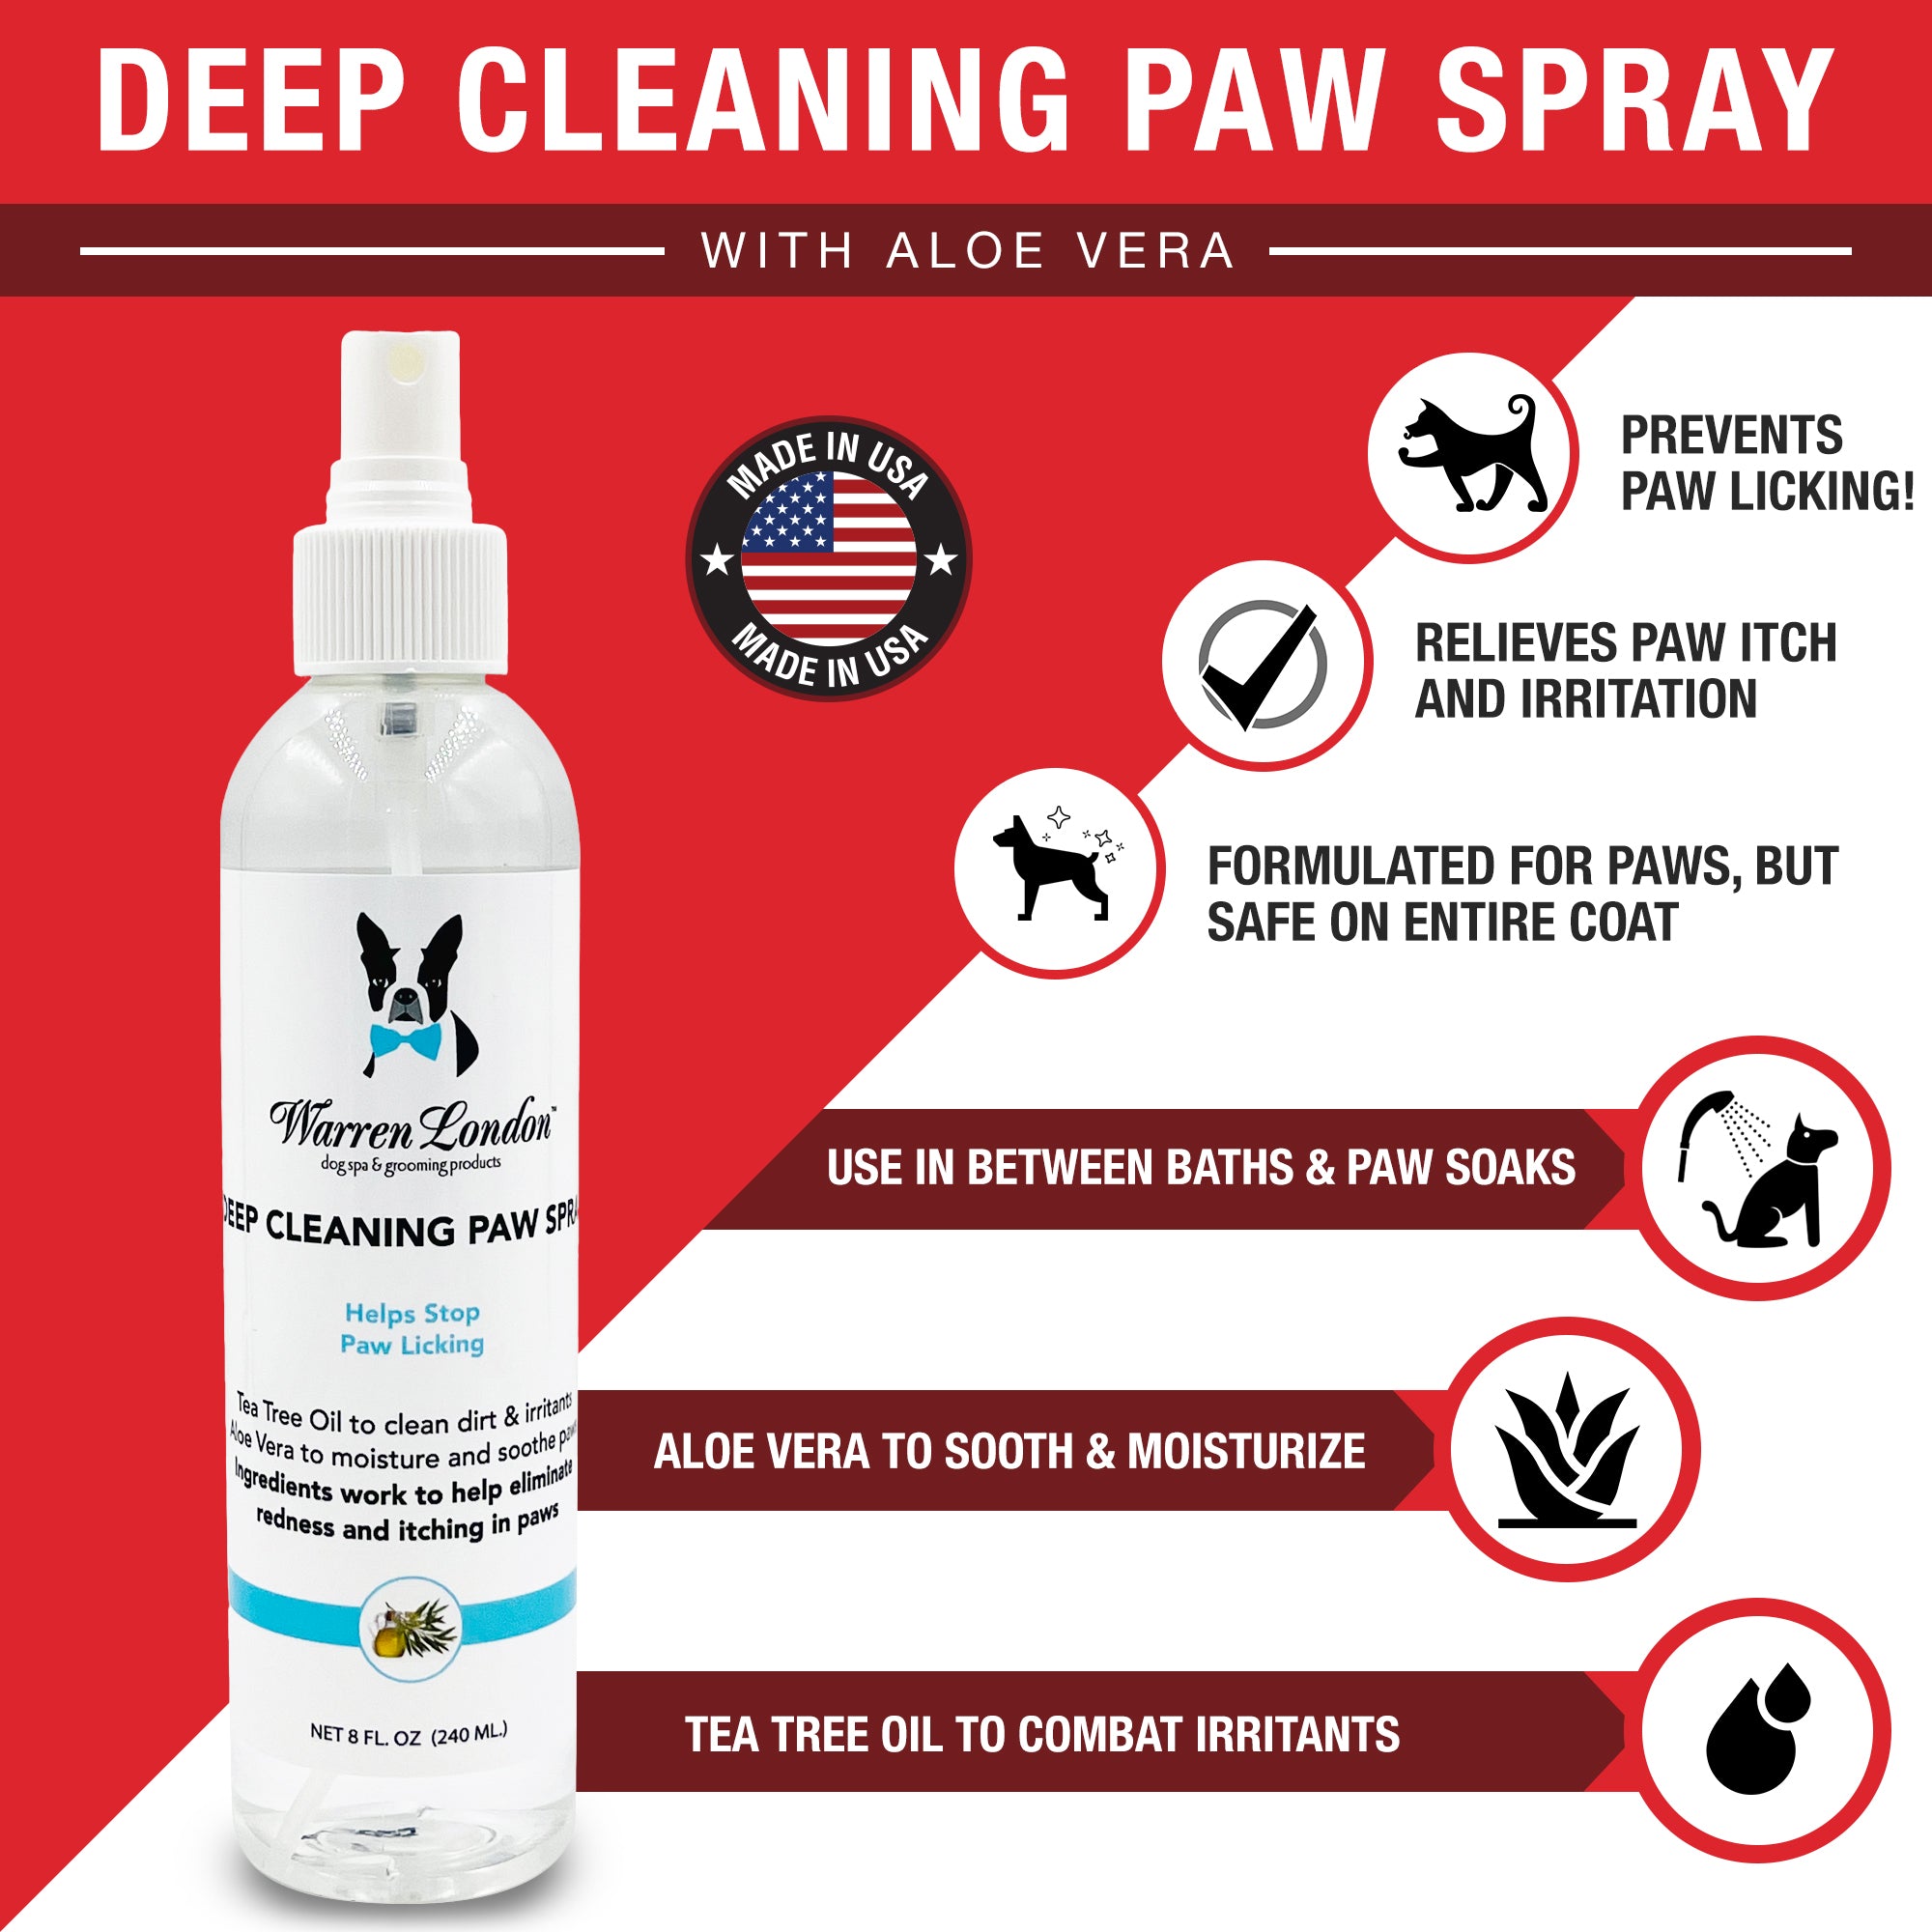 Deep Cleaning Paw Spray for Dogs Dog Supplies Warren London 